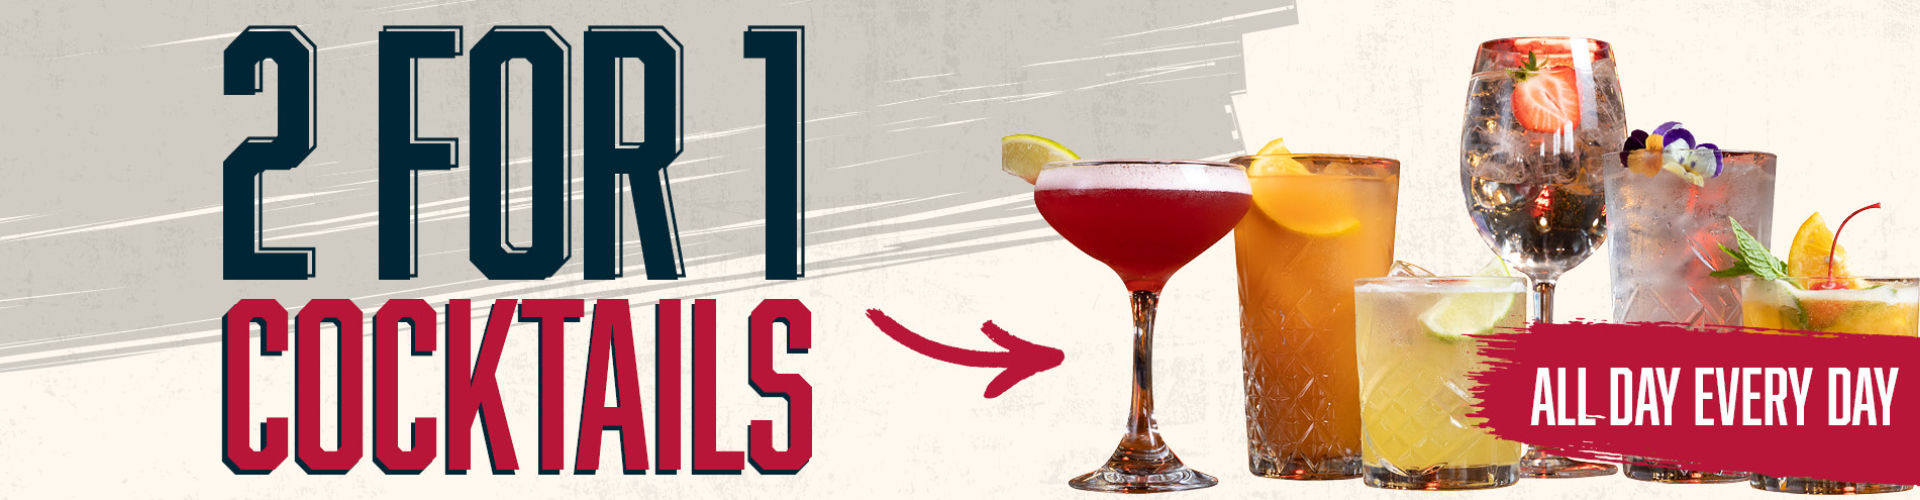 2 for 1 cocktails - monday to friday - from 5pm-10pm